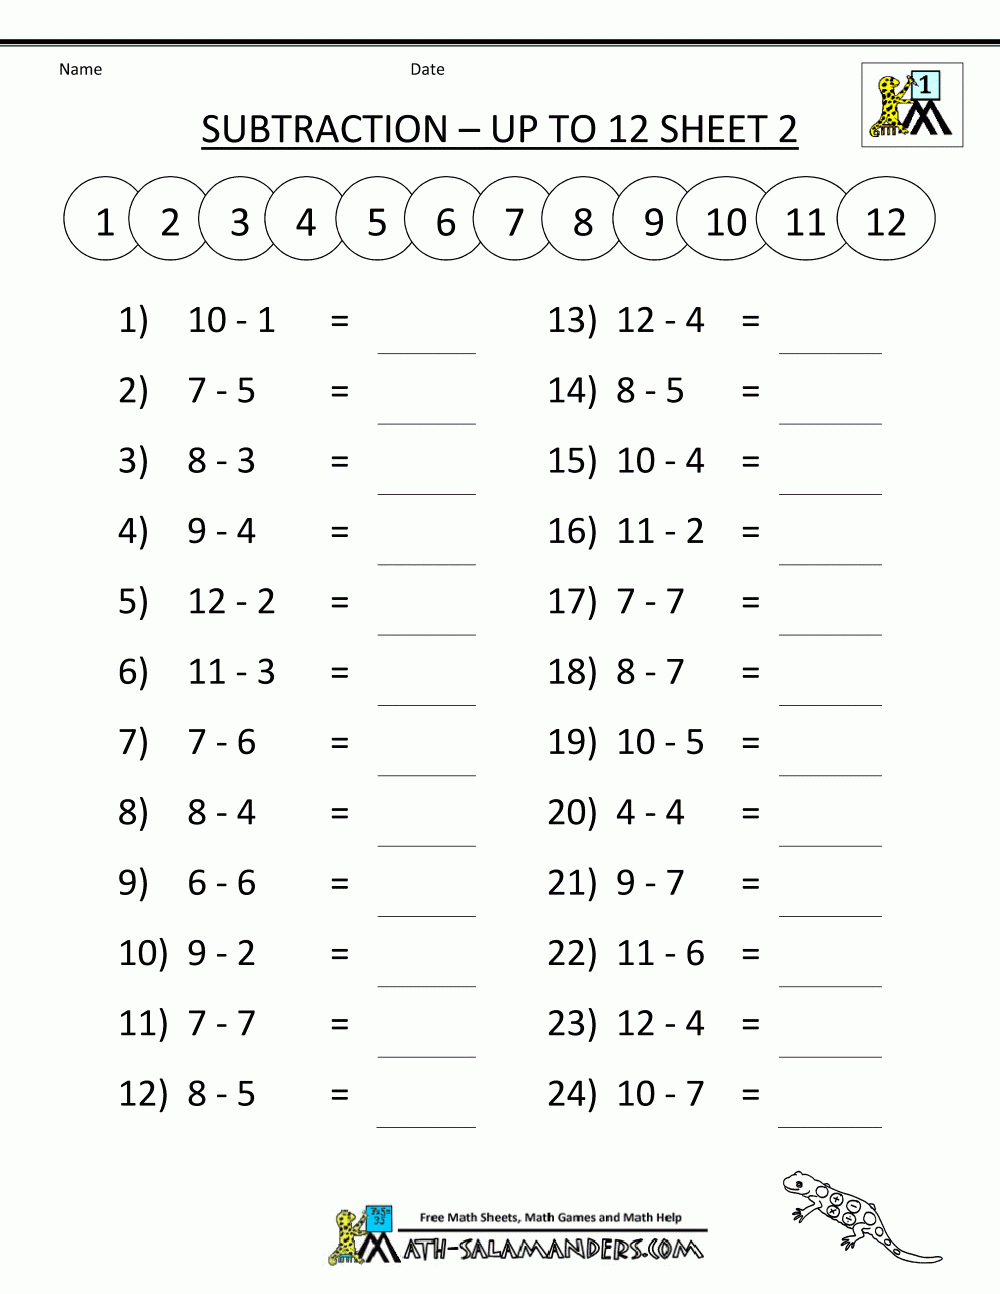 Free Printable Math Sheets Mental Subtraction To 12 2 | Výuka | Math - Free Printable Math Worksheets For Adults